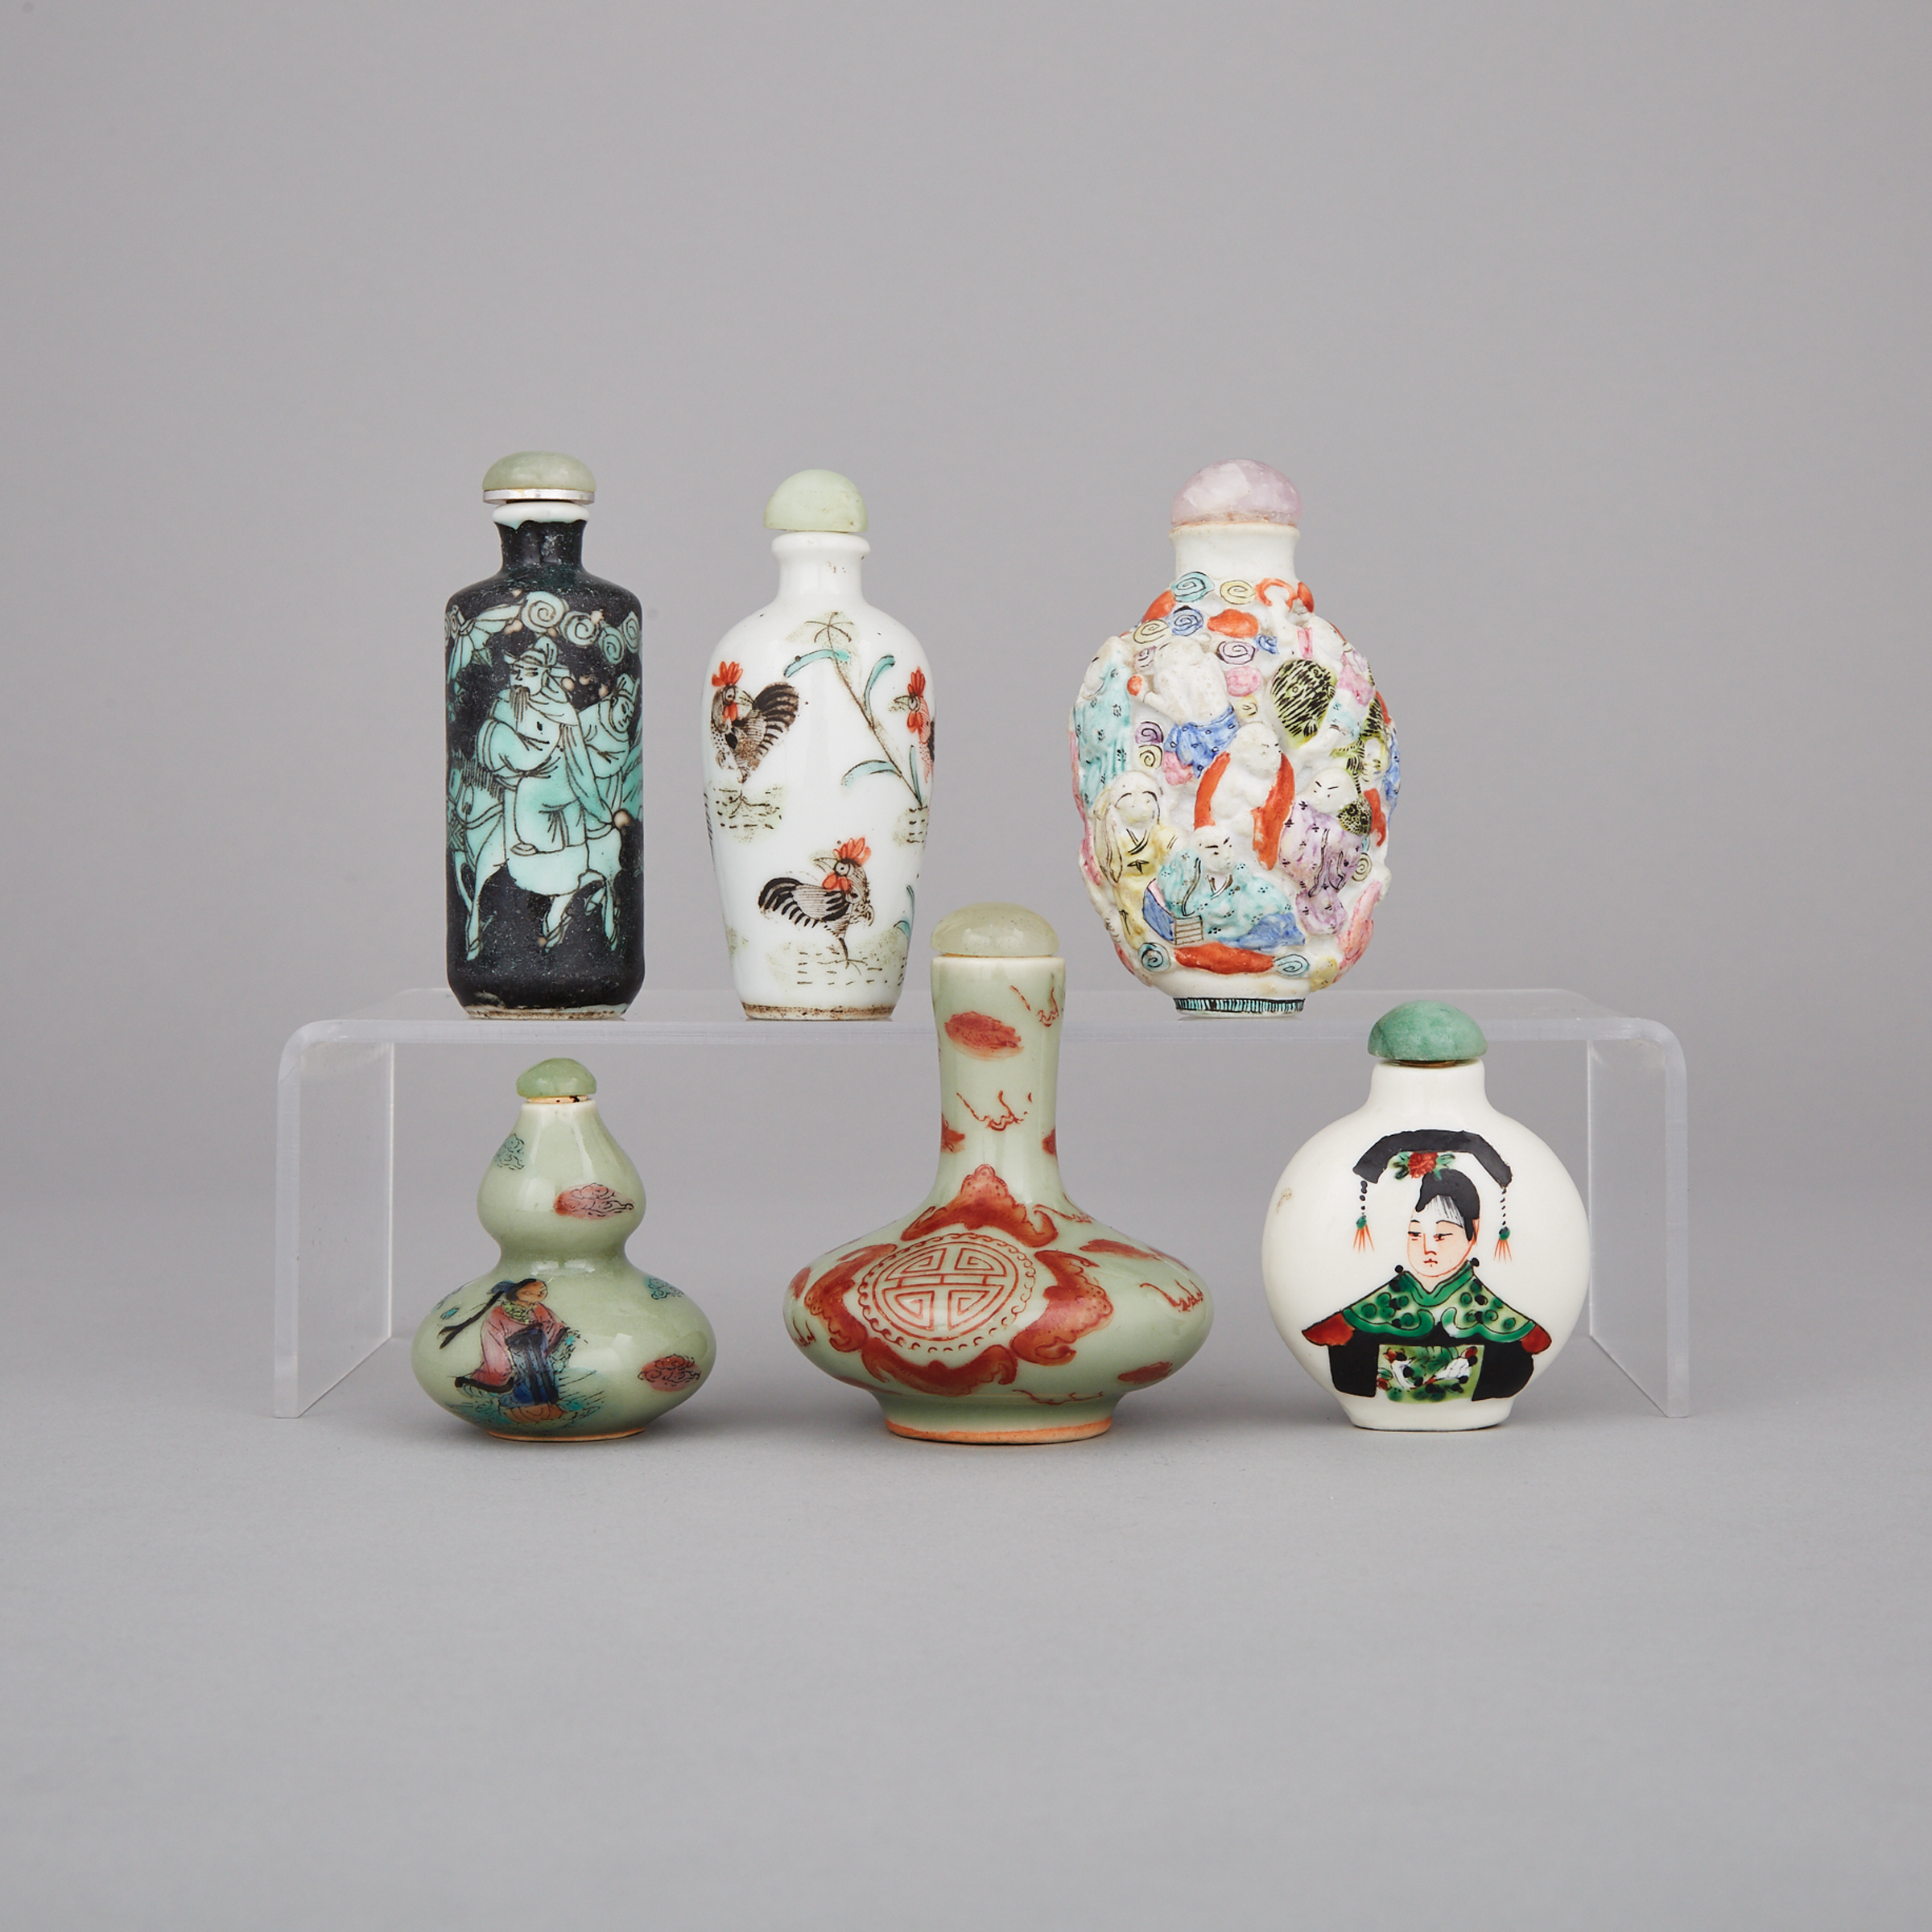 A Group of Six Painted Porcelain Snuff Bottles